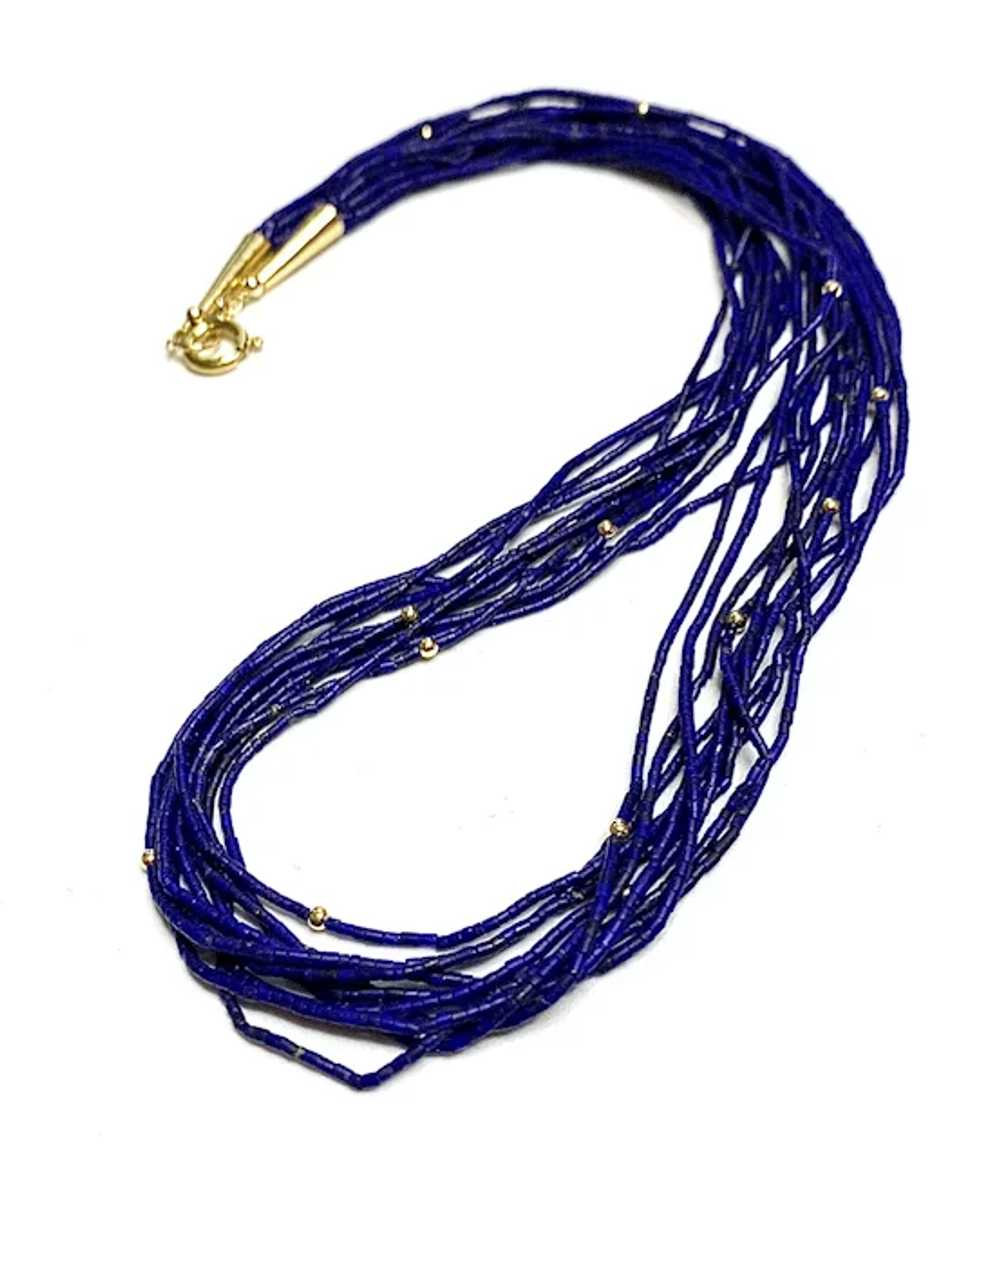 Ten Strands of Lapis and 14k Gold Necklace - image 2